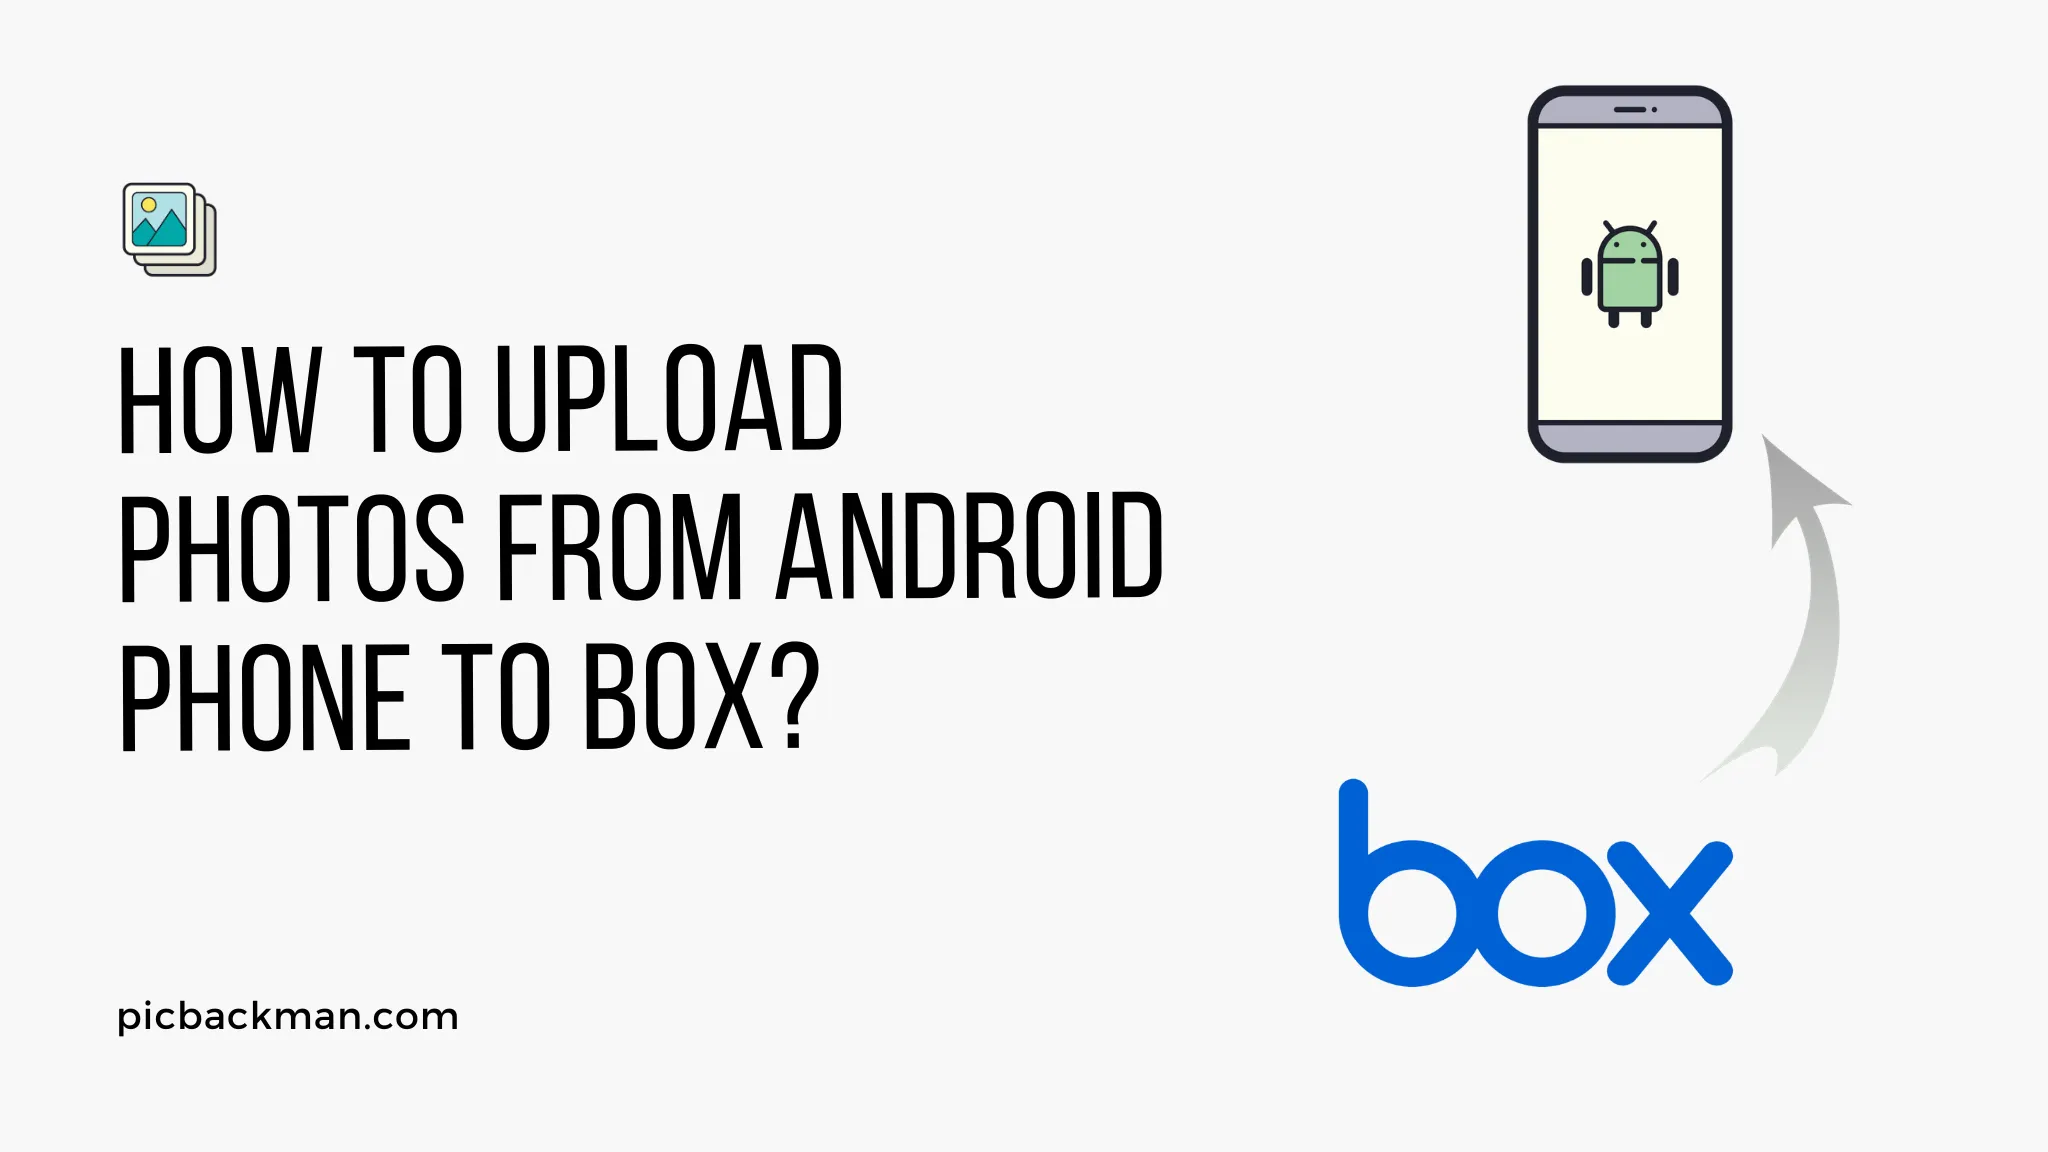 How to upload photos from Android phone to Box?